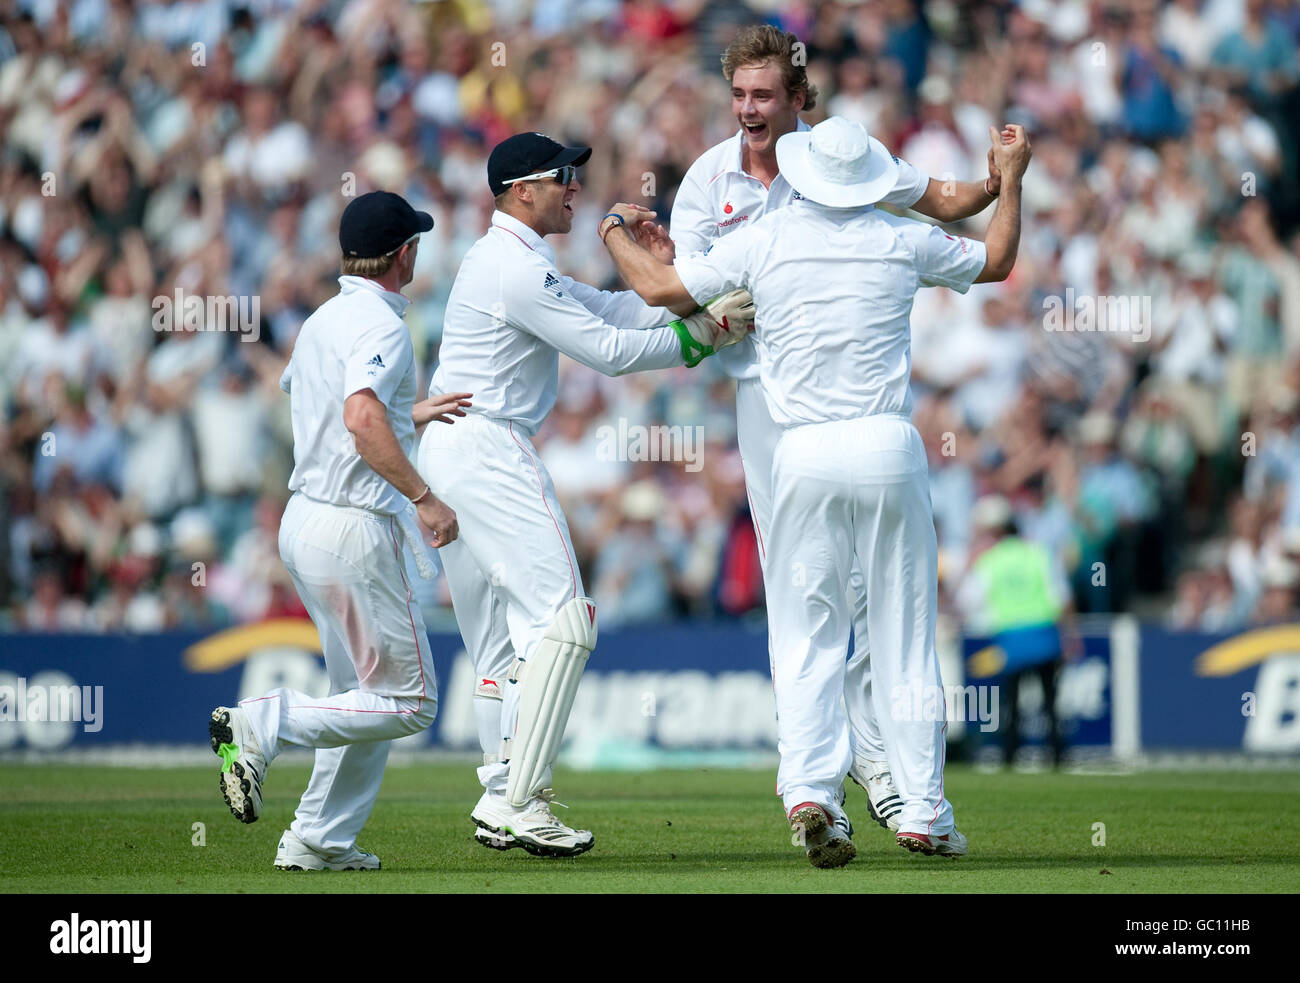 England's Stuart Broad celebrates dismissing Australia's Michael Hussey during the fifth npower Test Match at the Oval, London. Stock Photo